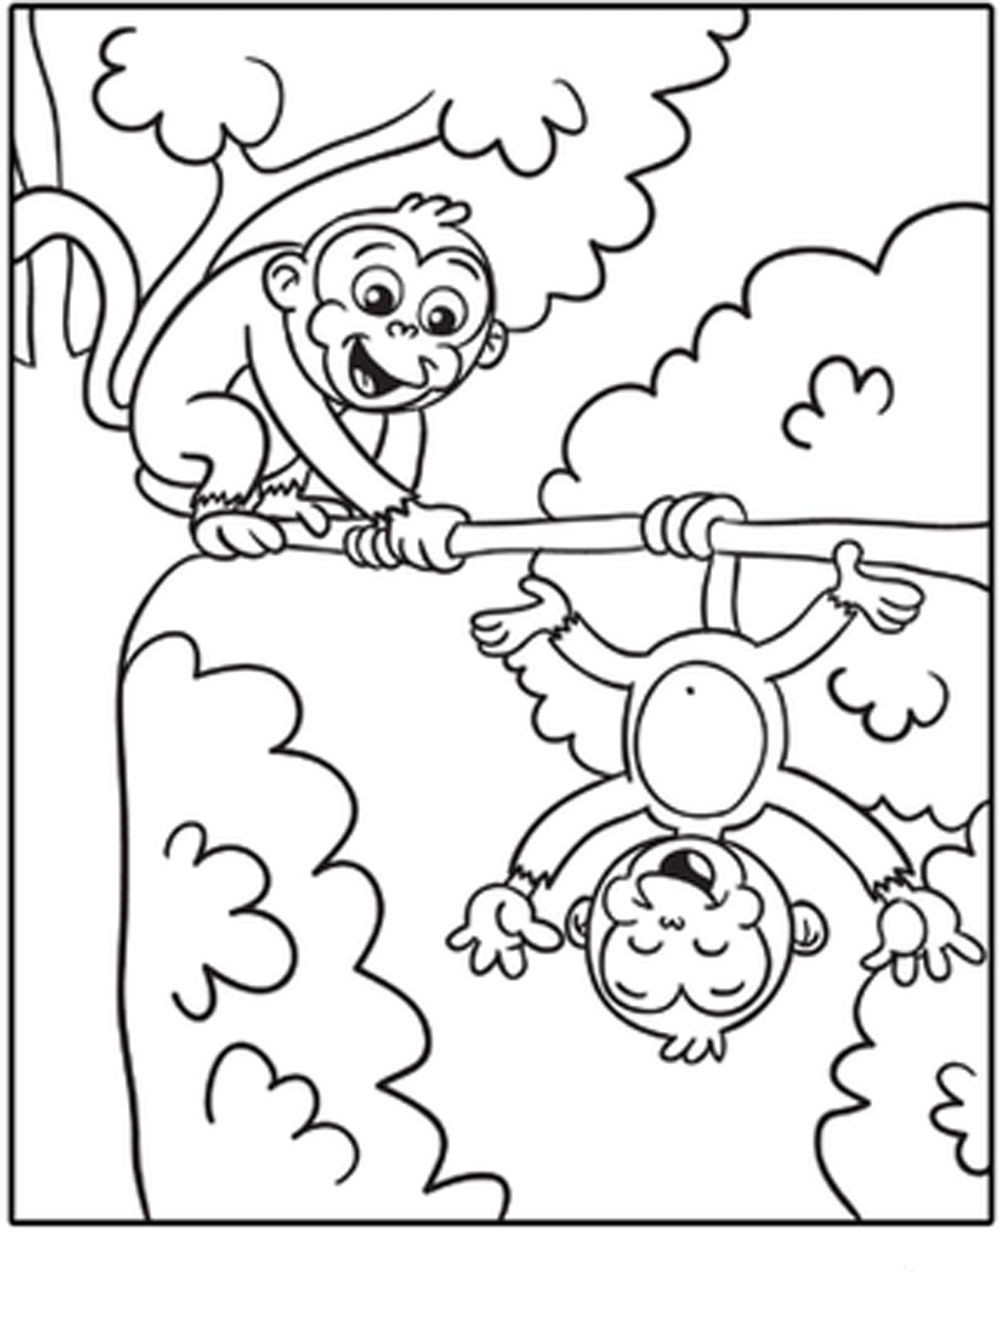 Monkey Coloring Pages For Kids
 free printable monkey coloring pages